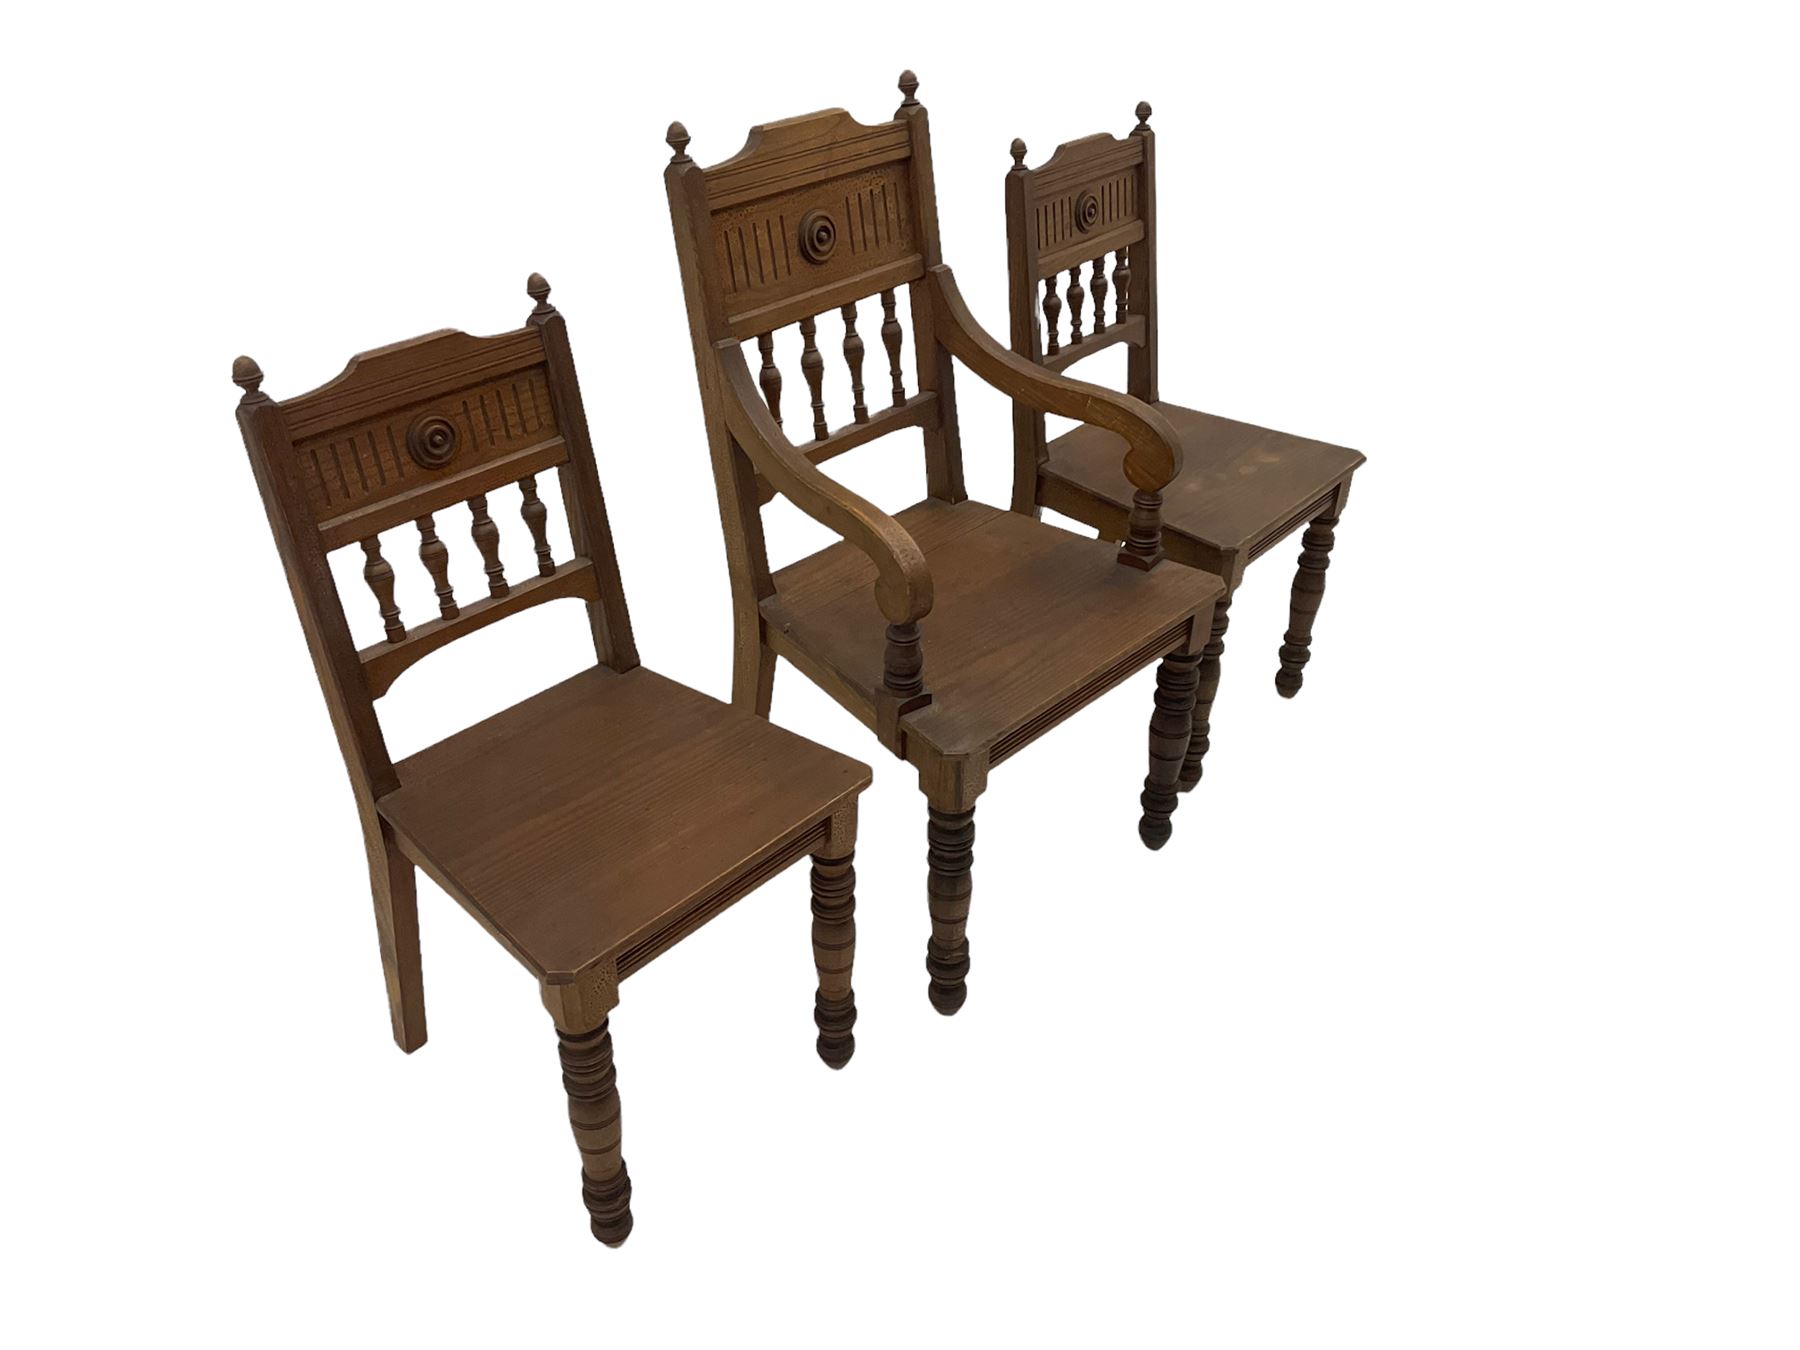 Victorian Gothic revival pitch pine armchair and pair of matching chairs - Image 6 of 7